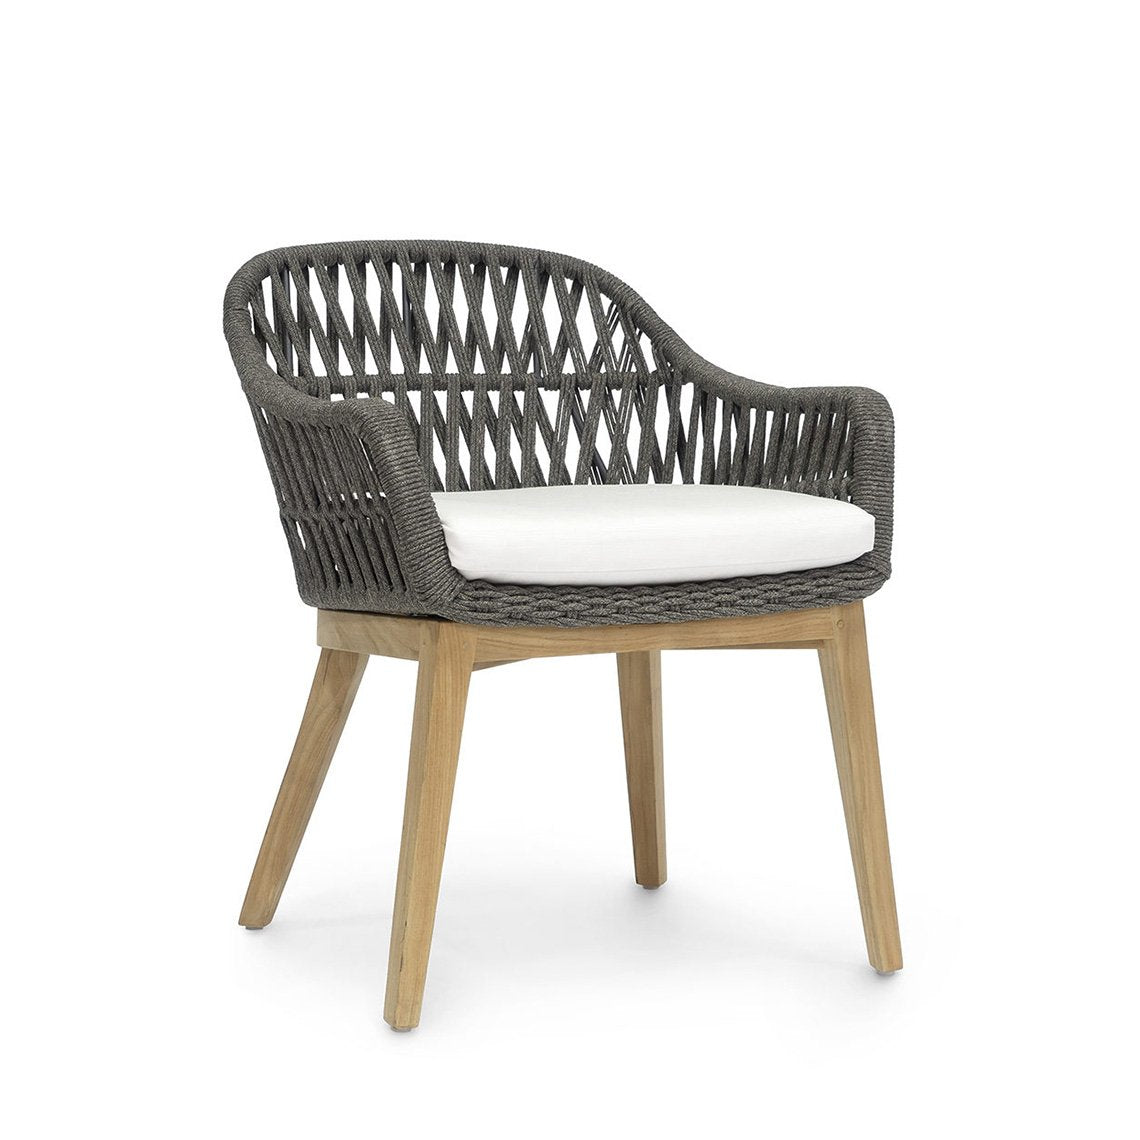 Napoli Outdoor Arm Chair